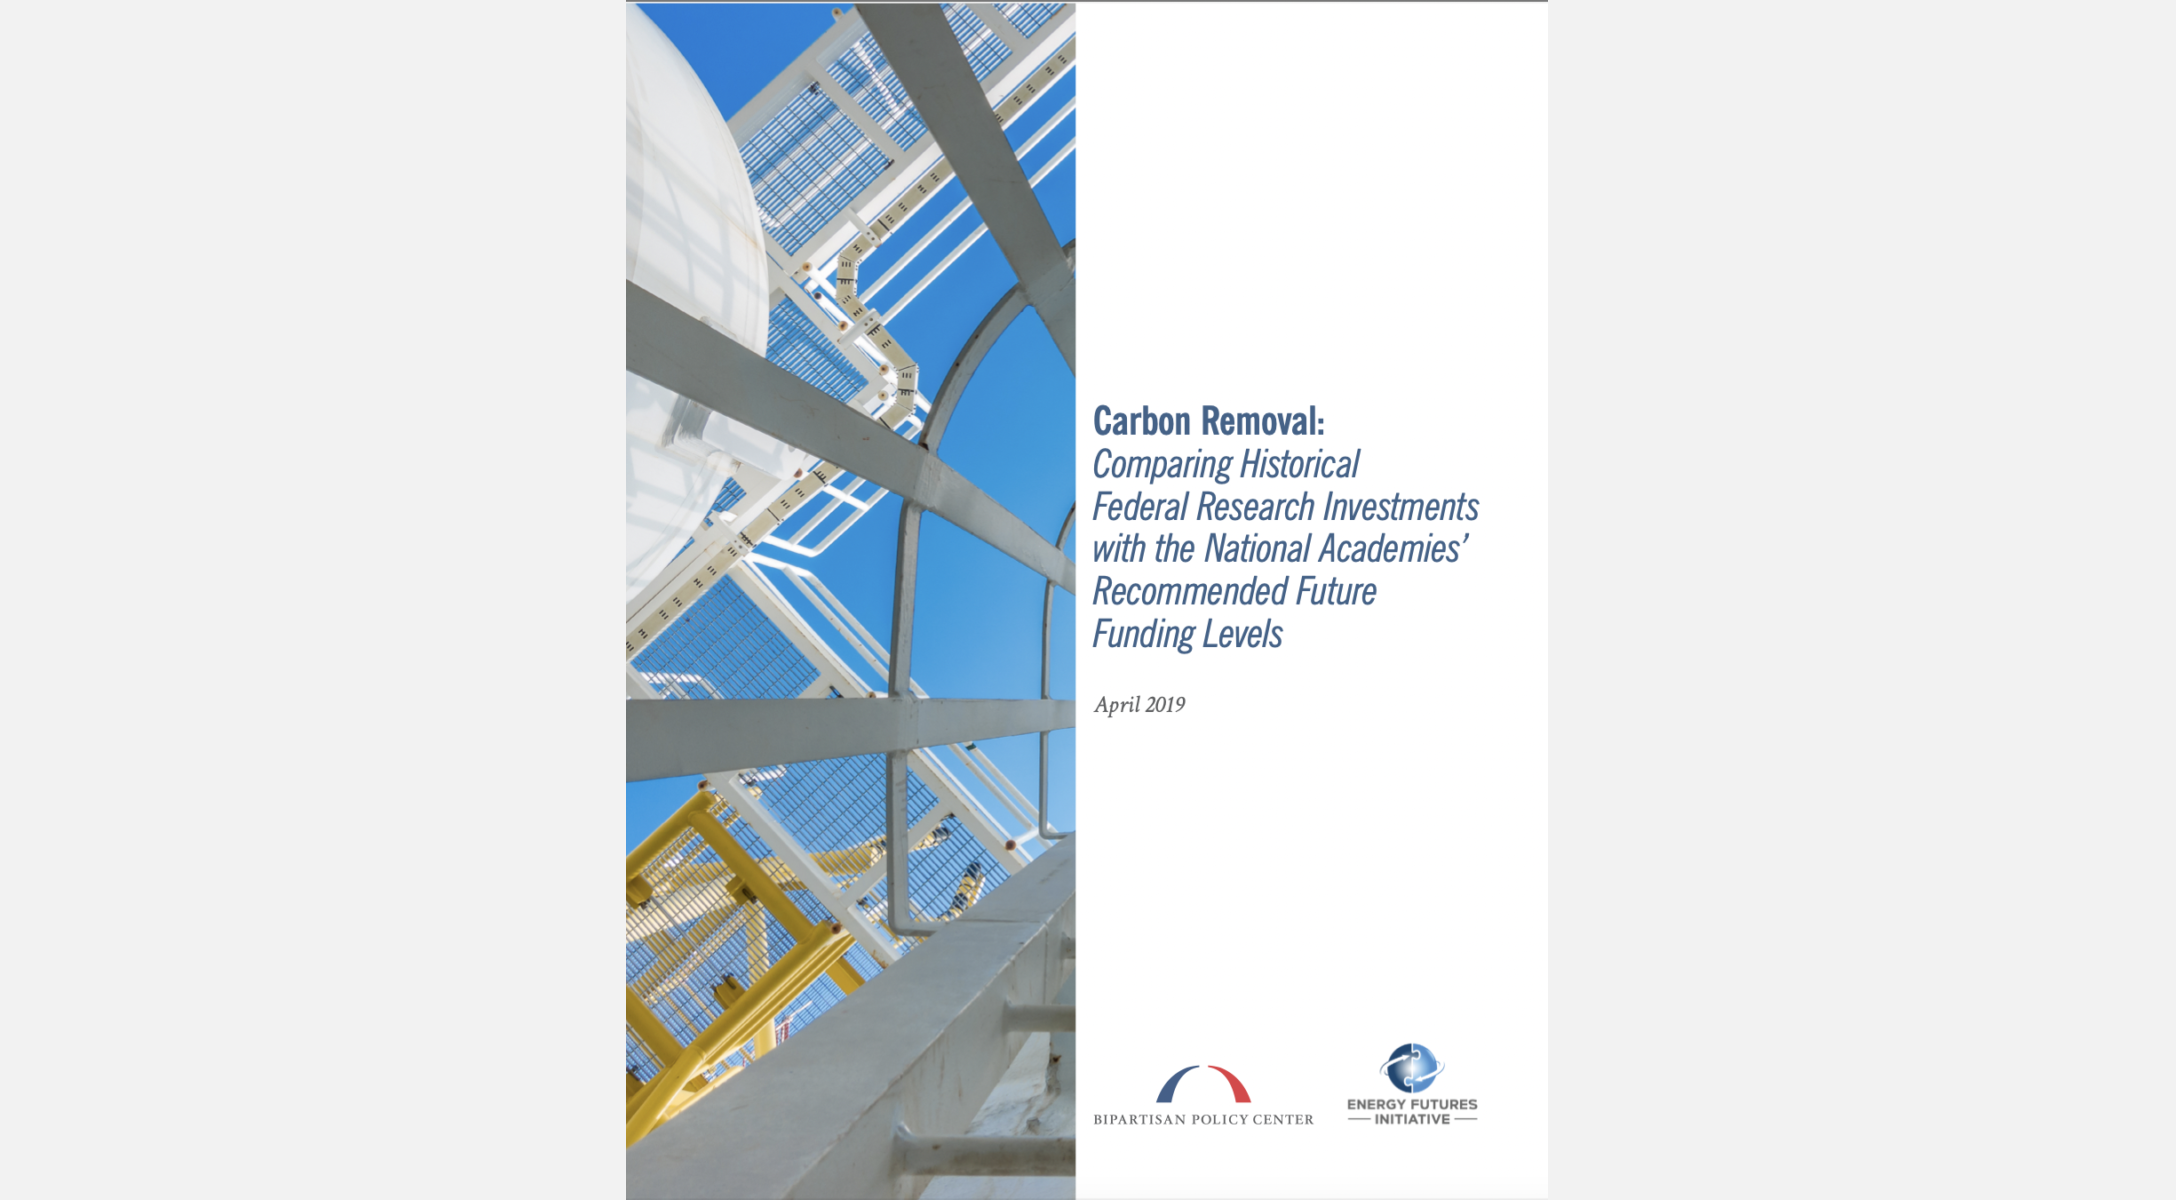 Image of Carbon Removal report cover.